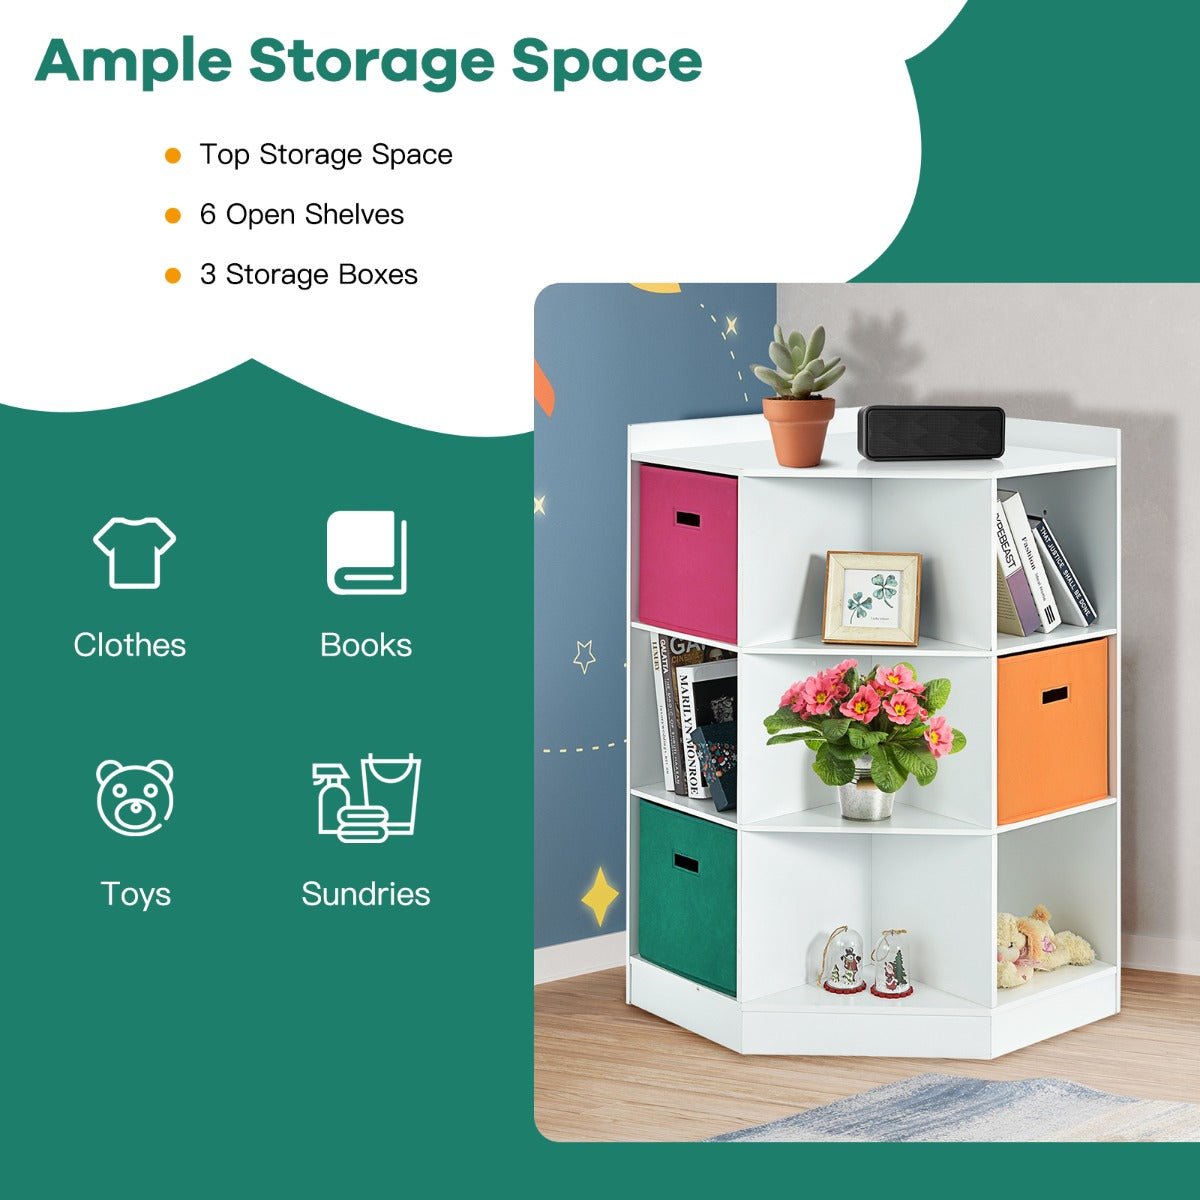 Enhance Playtime with the Toy Storage Organizer - Buy Now!